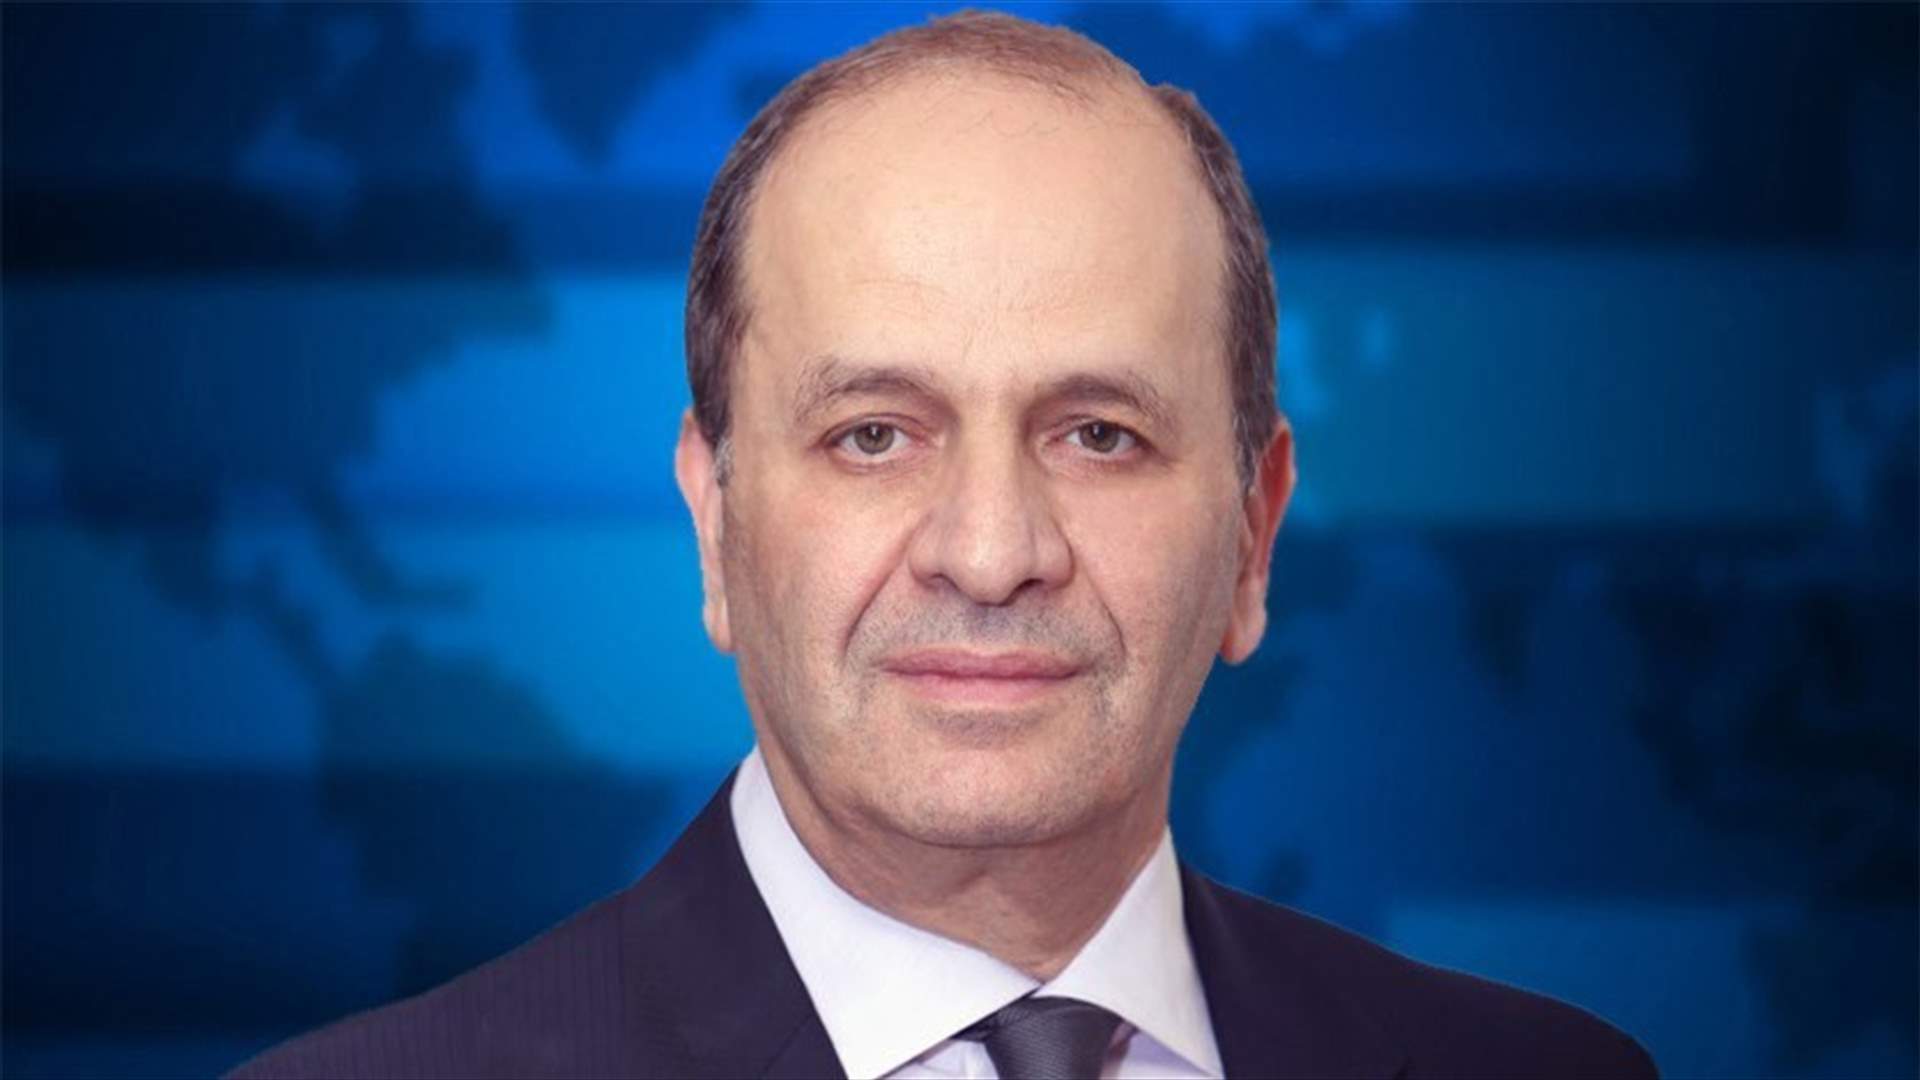 Pierre Daher: The entire country is targeted not only LBCI